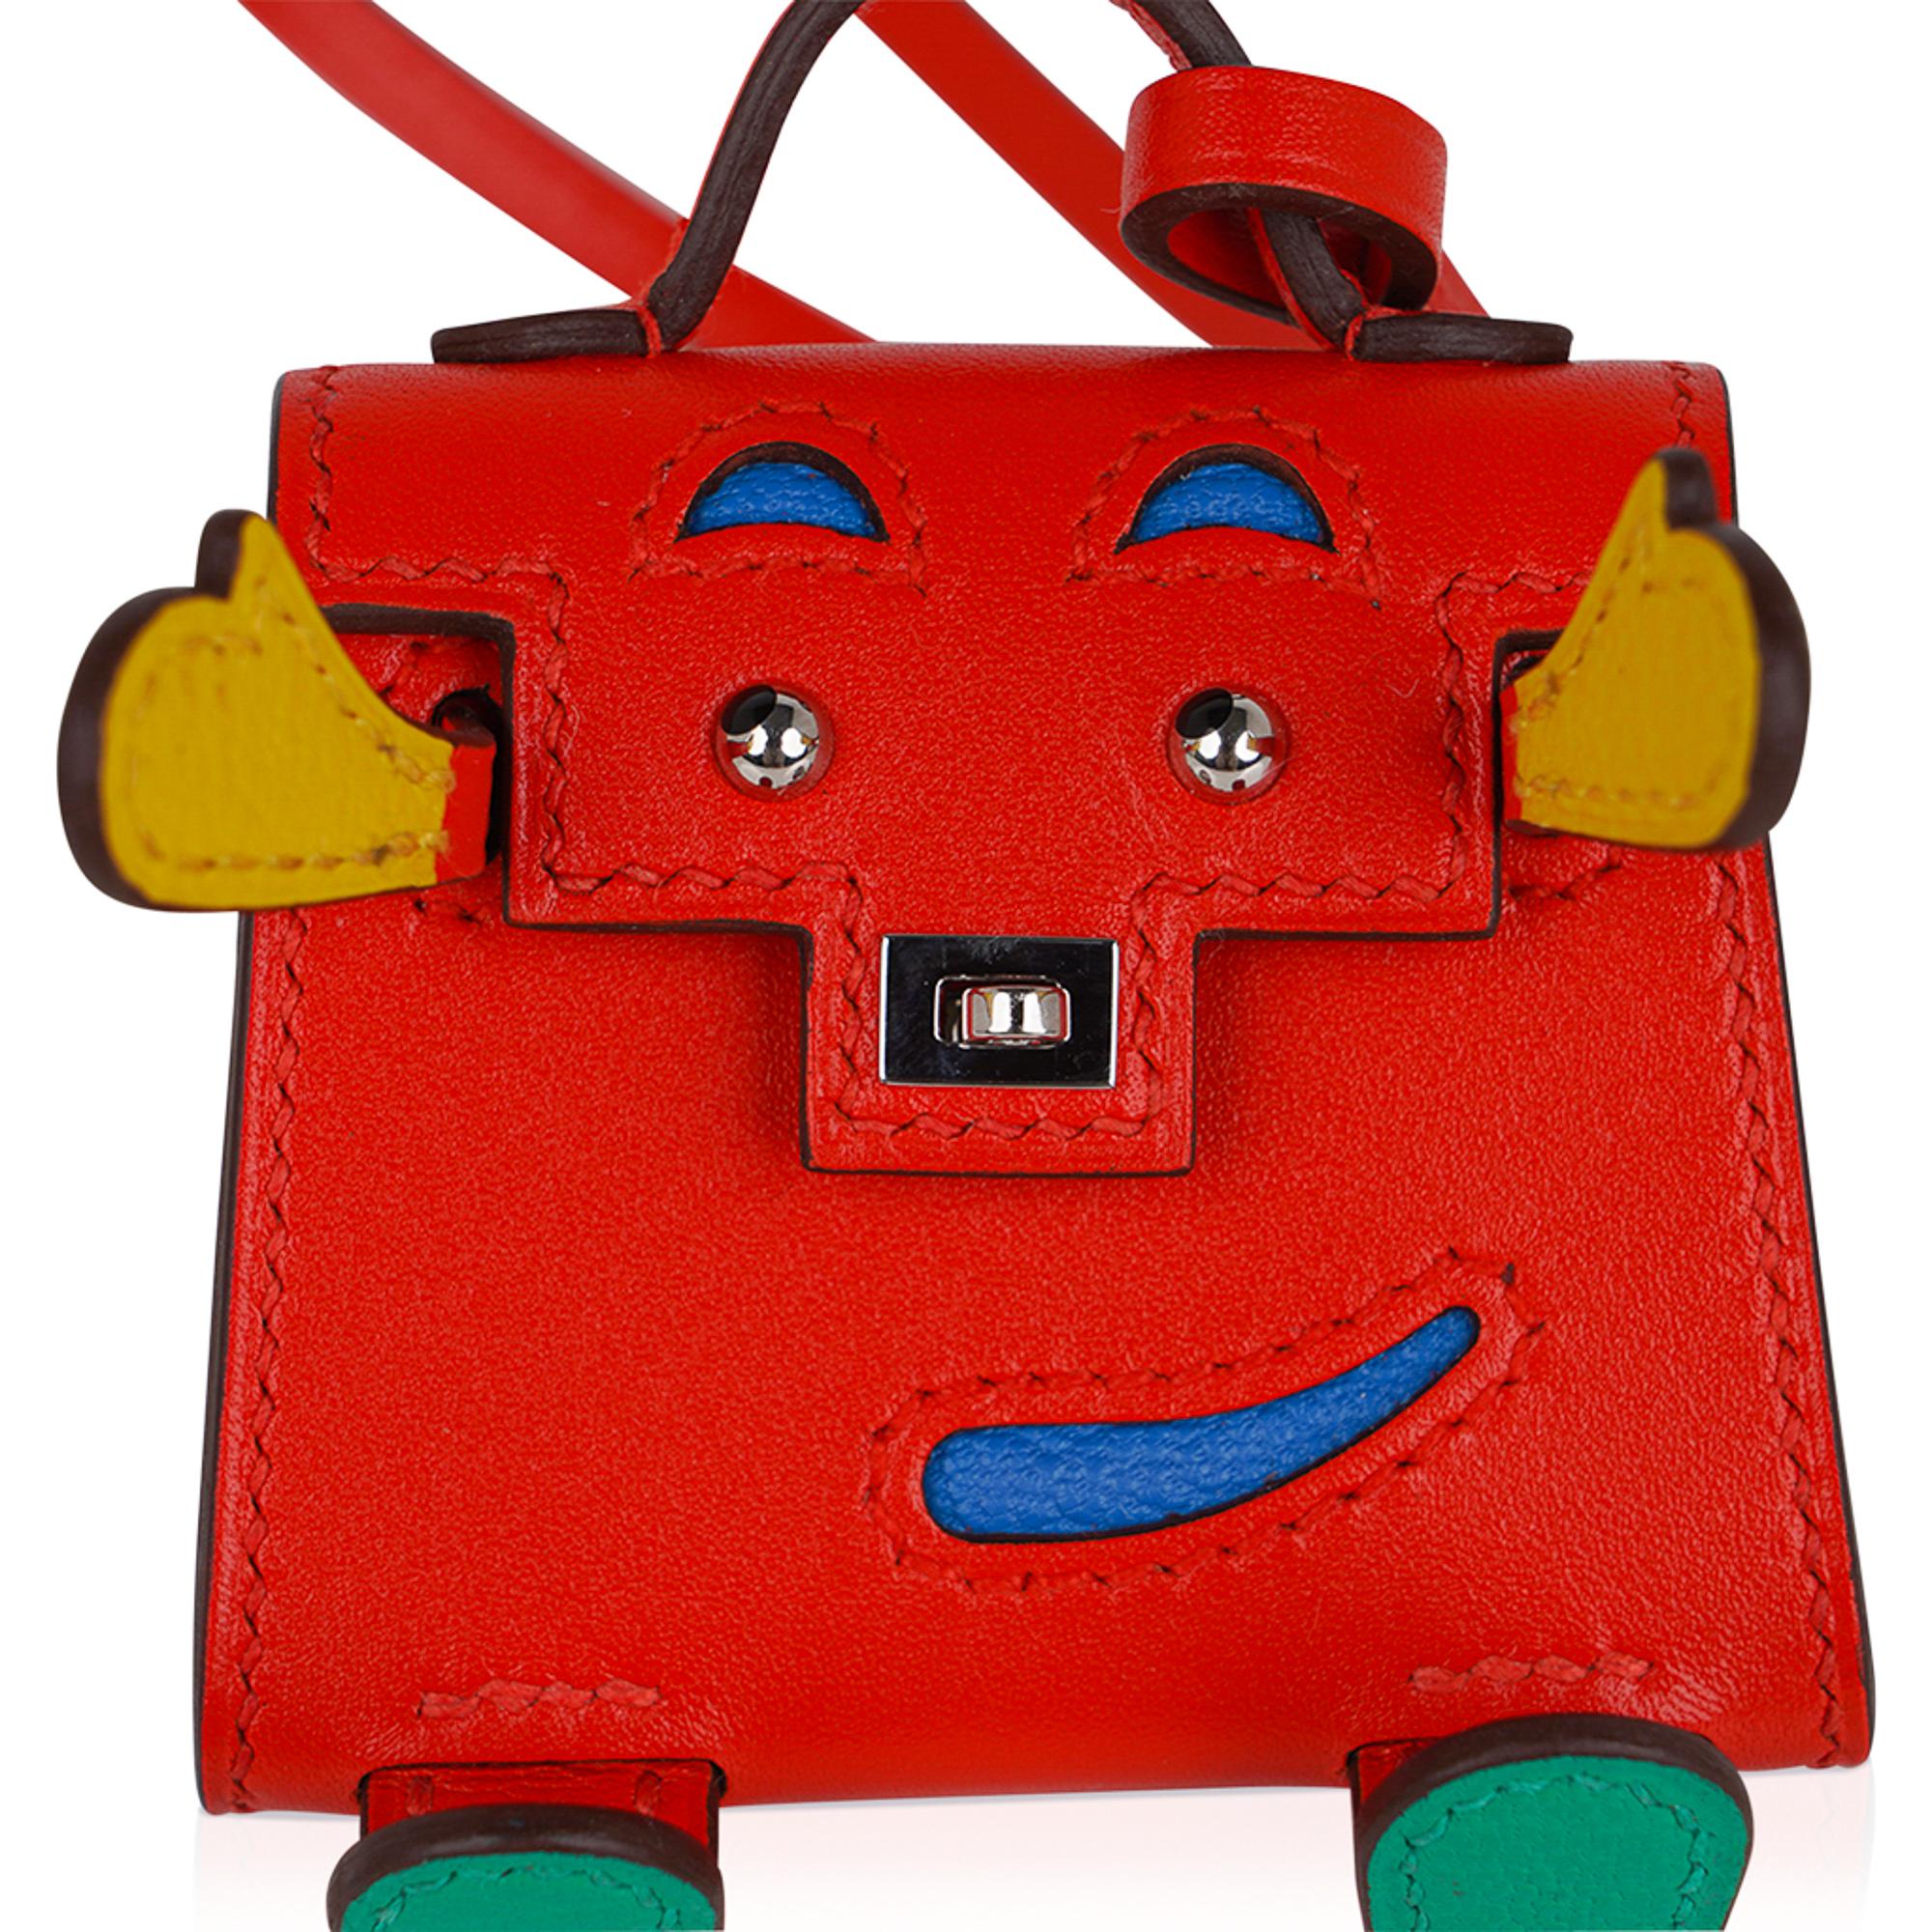 Mightychic offers a very rare limited edition Hermes Kelly Idole bag charm featured in  Capucine, Jaune de Naples, Vert Vertigo and Blue Zanzibar.
Bright and fun in Tadelakt leather.
Whimsical and delightful this fabulous charm has a turn lock that